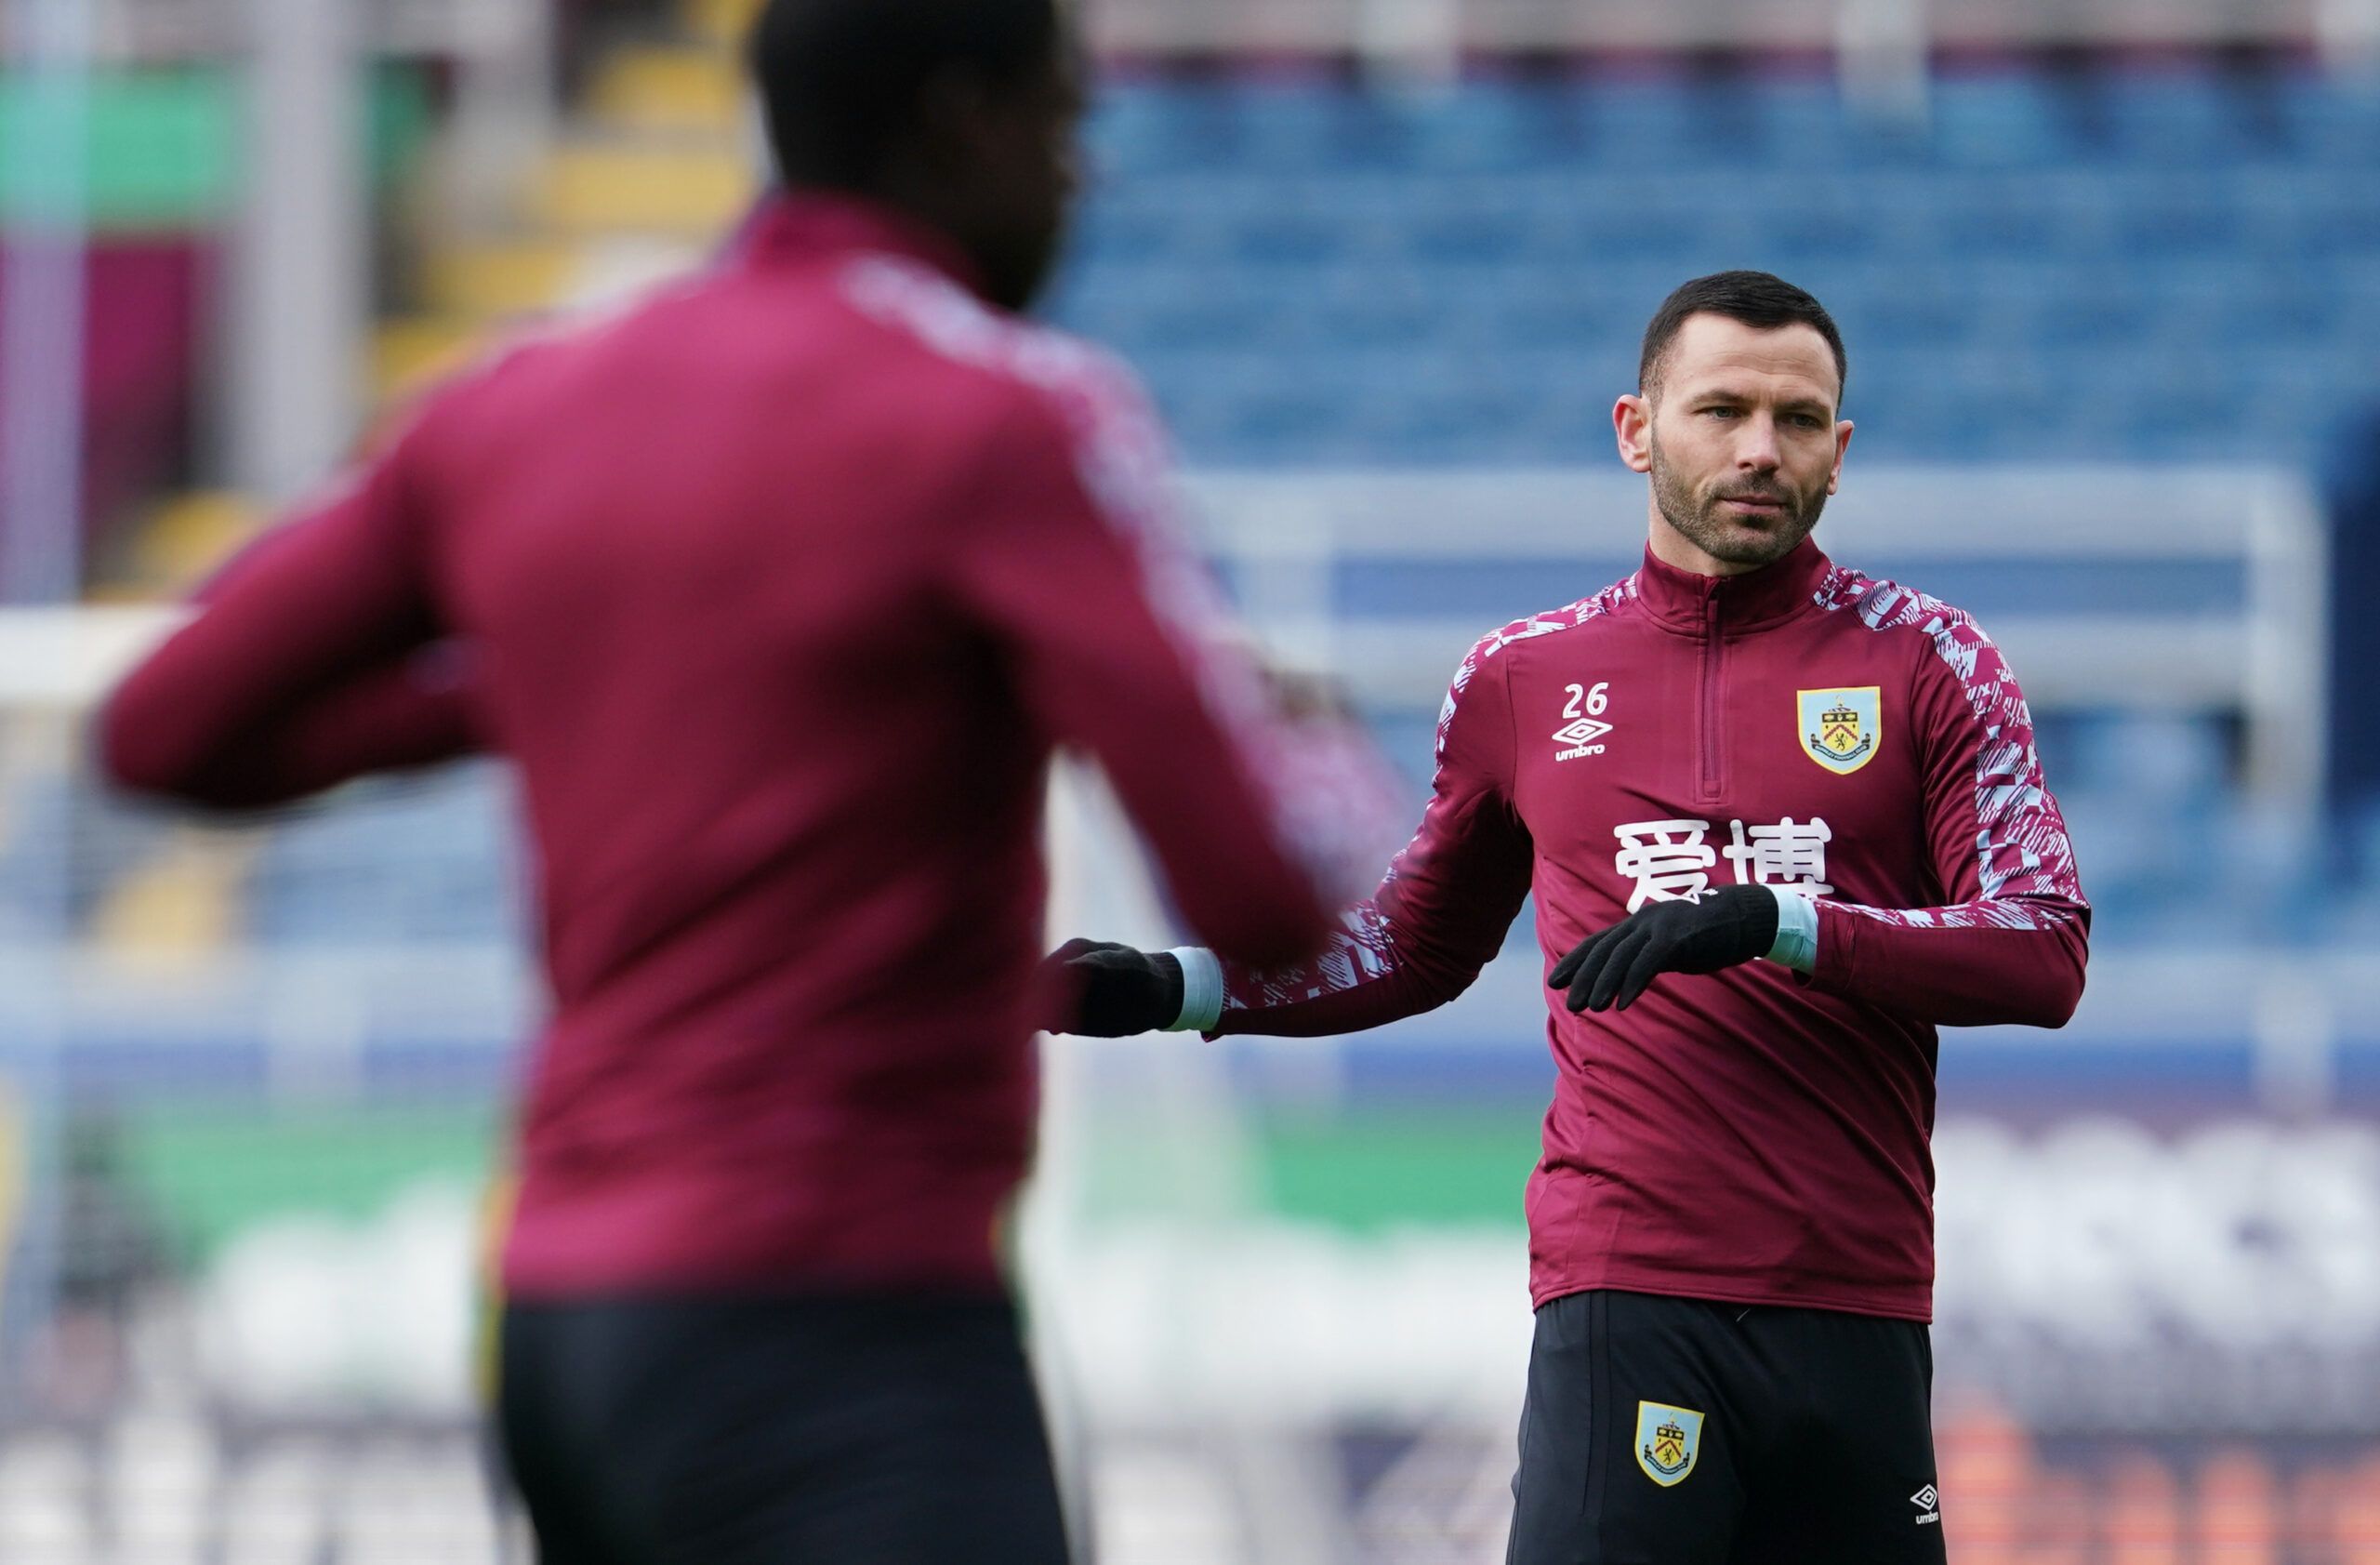 Soccer Football - Premier League - Burnley v Newcastle United - Turf Moor, Burnley, Britain - April 11, 2021 Burnley's Phil Bardsley during the warm up before the match Pool via REUTERS/Jon Super EDITORIAL USE ONLY. No use with unauthorized audio, video, data, fixture lists, club/league logos or 'live' services. Online in-match use limited to 75 images, no video emulation. No use in betting, games or single club /league/player publications.  Please contact your account representative for further